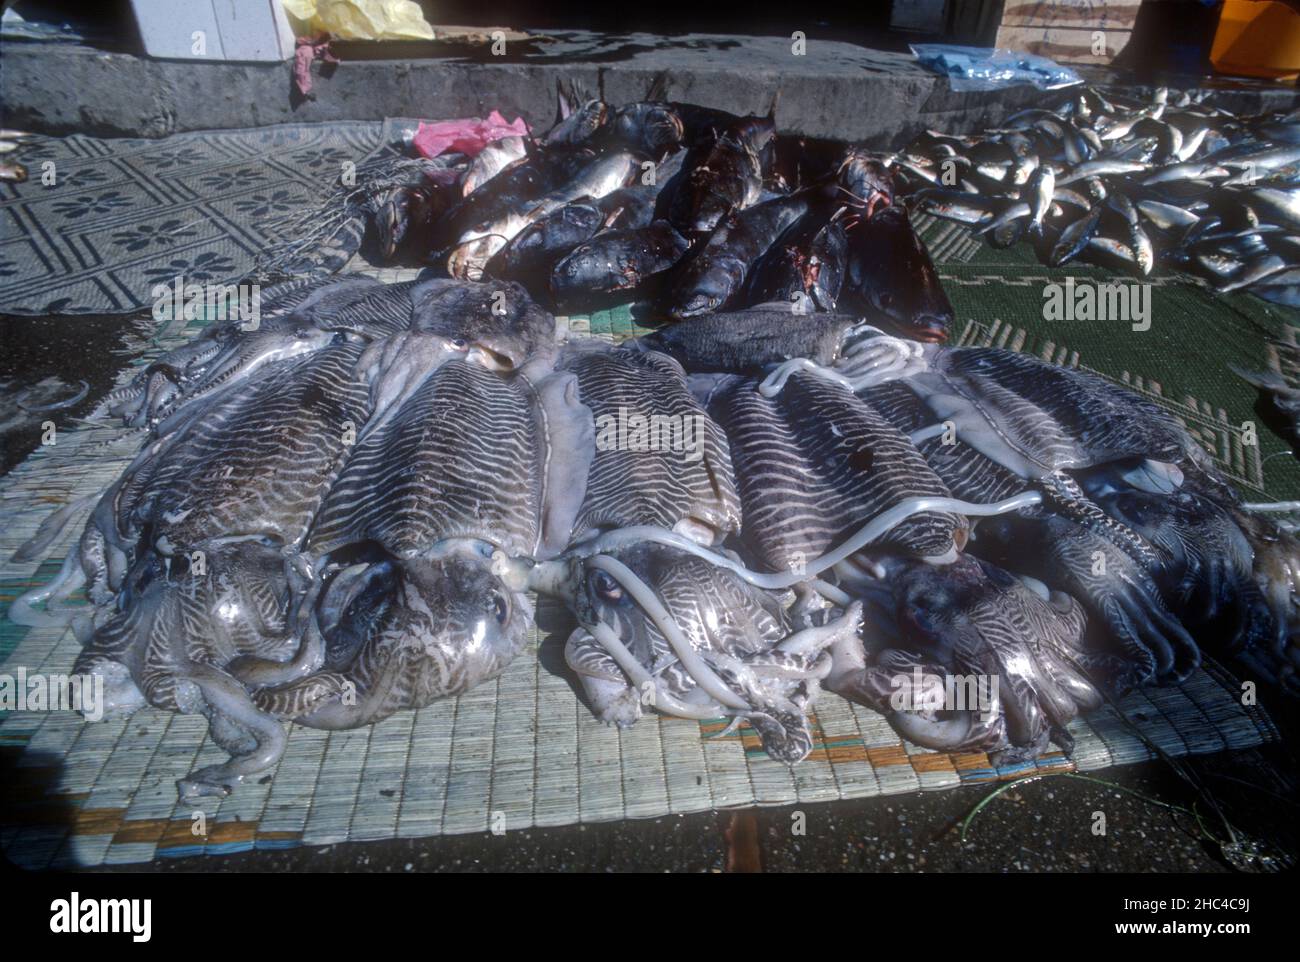 Squid for sale at Muscat market Oman Stock Photo